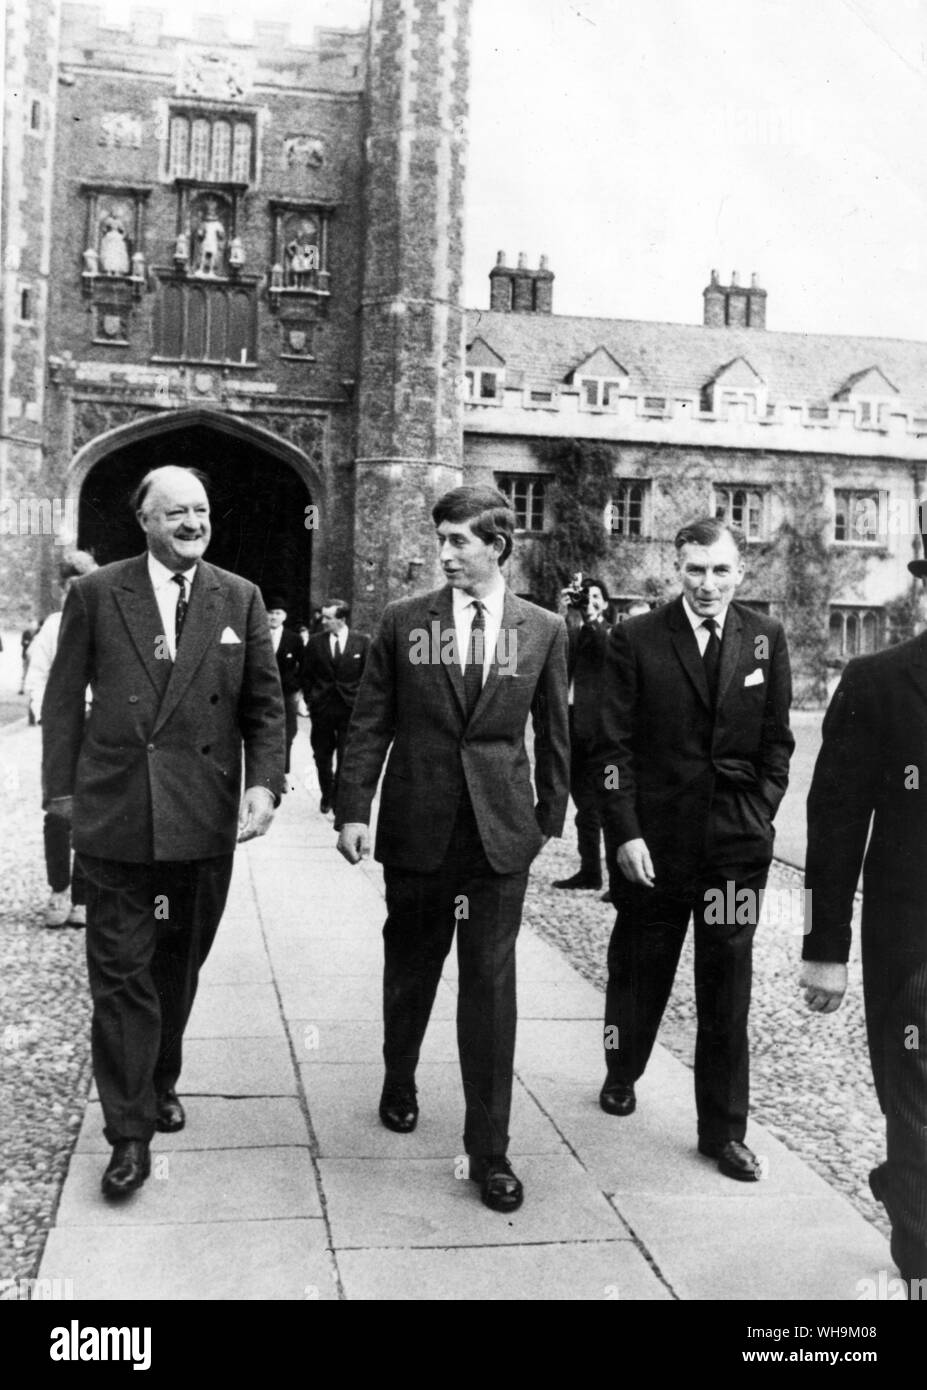 '8th October 1967: Prince Charles arrives at Cambridge. He is 19 yrs old next month. He walks across the quadrangle at Cambridge yesterday, with Lord Butler and Head Tutor, Dr. Denis Marrian.' Stock Photo